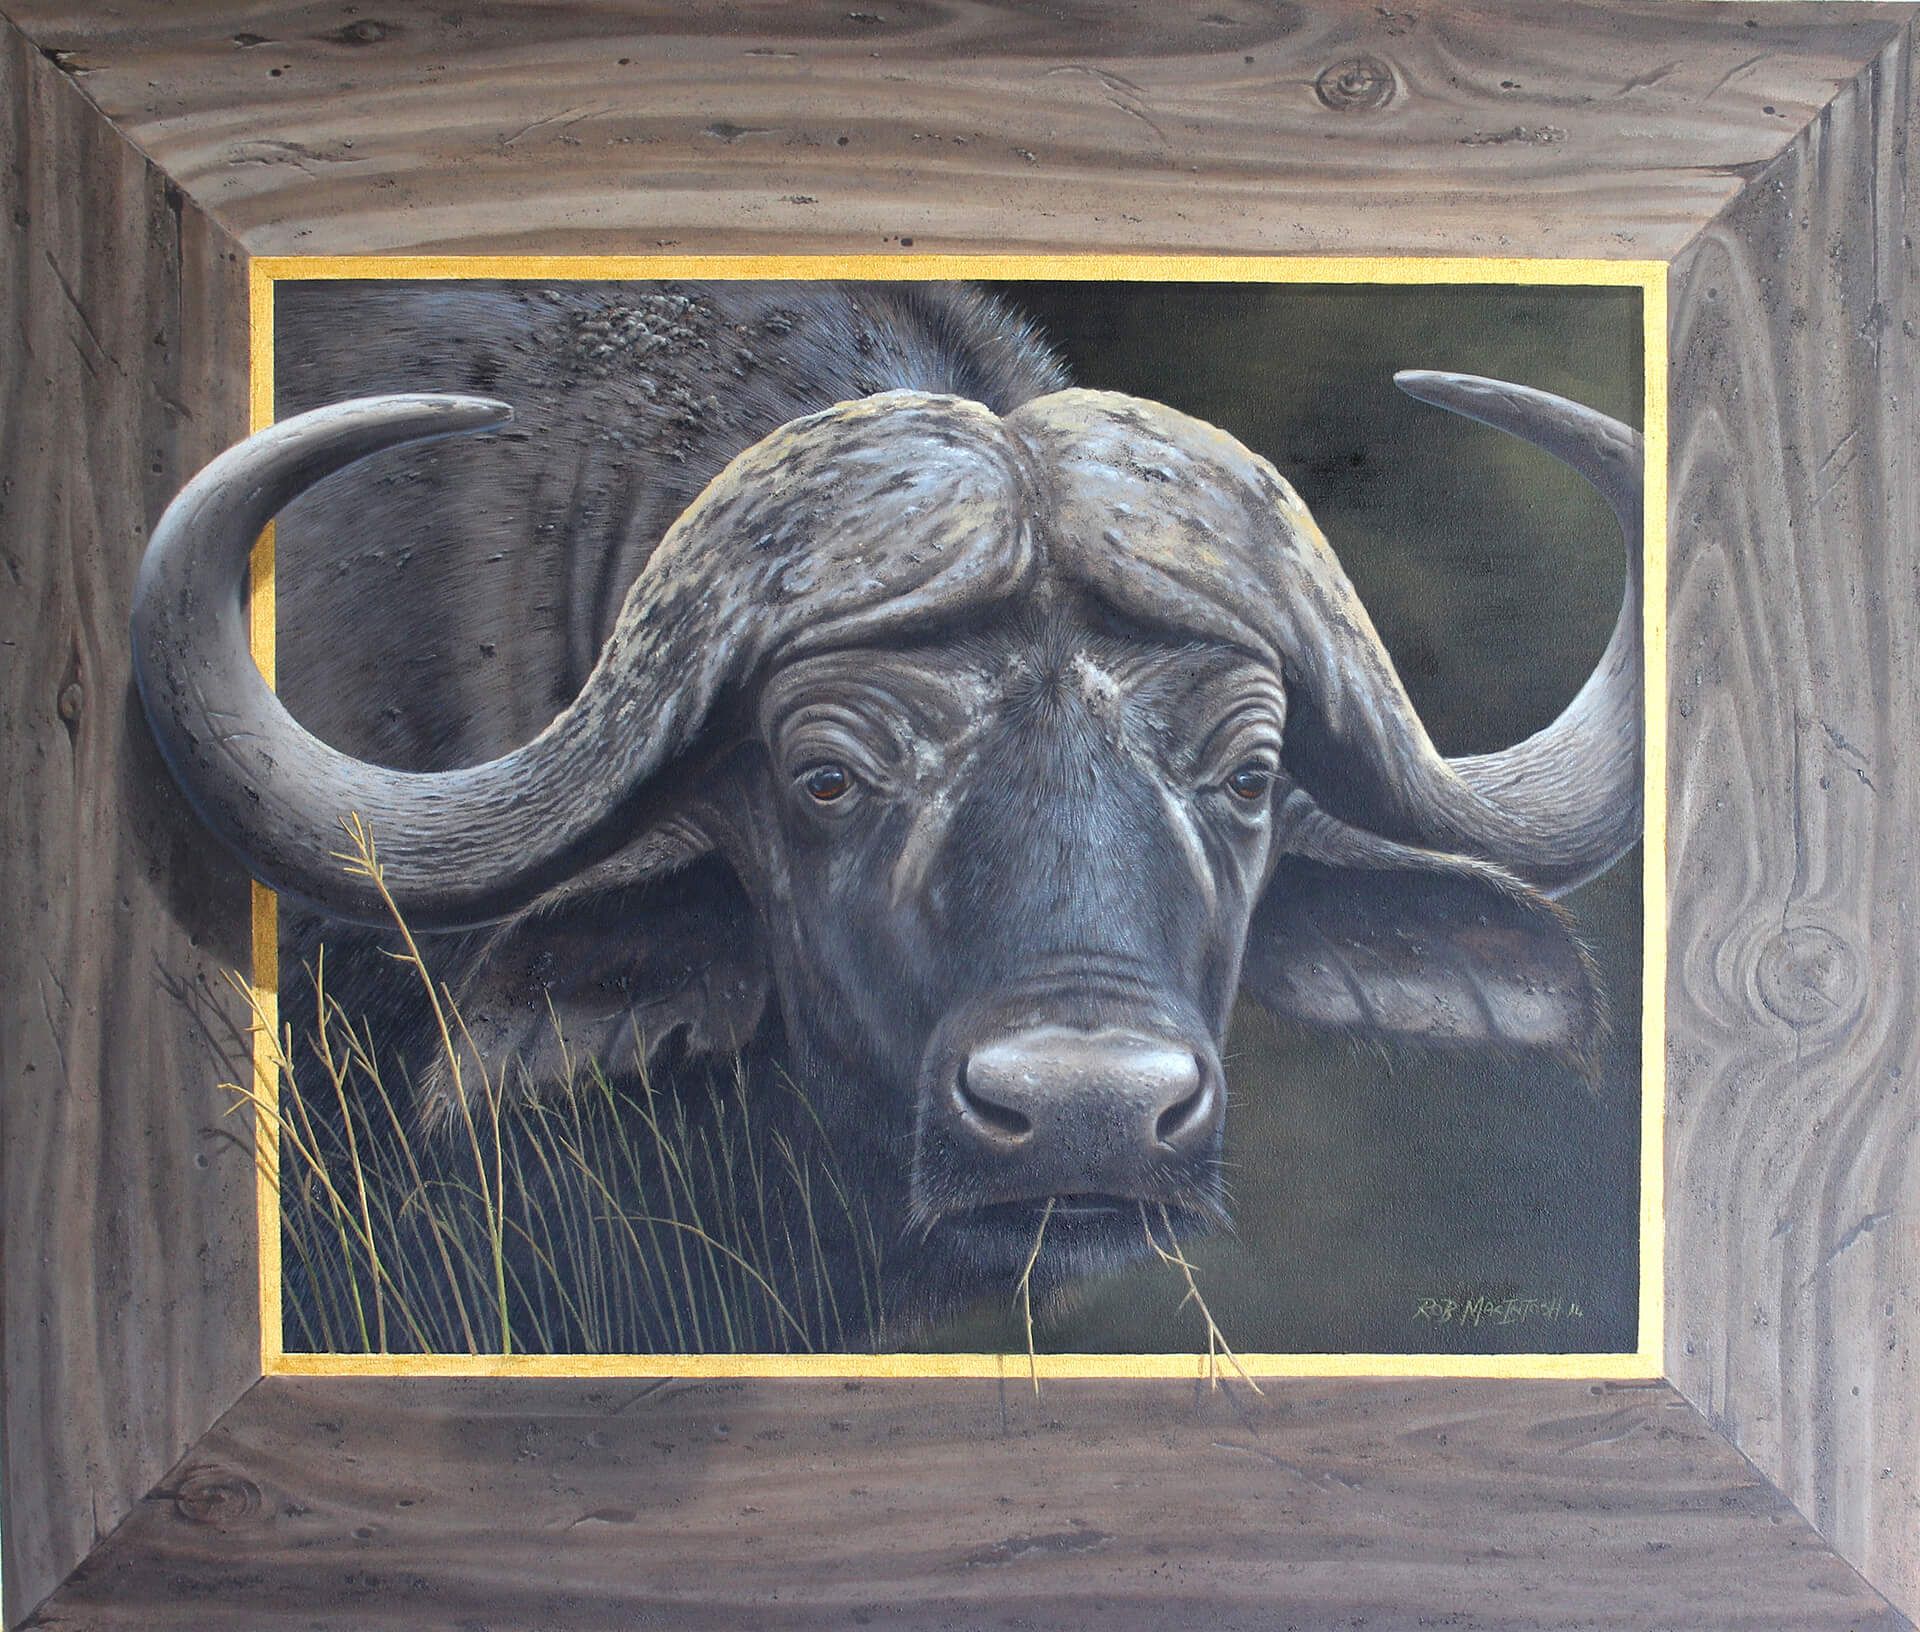 Photorealistic painting of the head of a buffalo